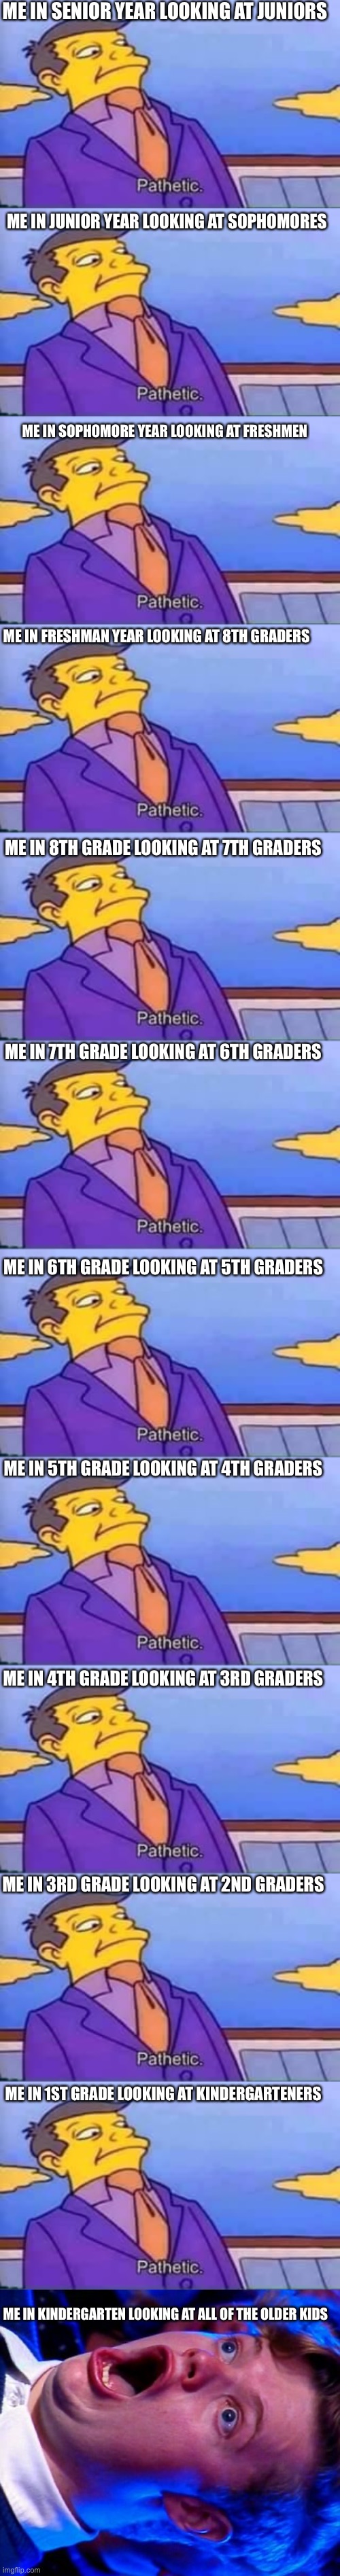 I did a funny | ME IN SENIOR YEAR LOOKING AT JUNIORS; ME IN JUNIOR YEAR LOOKING AT SOPHOMORES; ME IN SOPHOMORE YEAR LOOKING AT FRESHMEN; ME IN FRESHMAN YEAR LOOKING AT 8TH GRADERS; ME IN 8TH GRADE LOOKING AT 7TH GRADERS; ME IN 7TH GRADE LOOKING AT 6TH GRADERS; ME IN 6TH GRADE LOOKING AT 5TH GRADERS; ME IN 5TH GRADE LOOKING AT 4TH GRADERS; ME IN 4TH GRADE LOOKING AT 3RD GRADERS; ME IN 3RD GRADE LOOKING AT 2ND GRADERS; ME IN 1ST GRADE LOOKING AT KINDERGARTENERS; ME IN KINDERGARTEN LOOKING AT ALL OF THE OLDER KIDS | image tagged in skinner pathetic,amazed magikarp,school | made w/ Imgflip meme maker